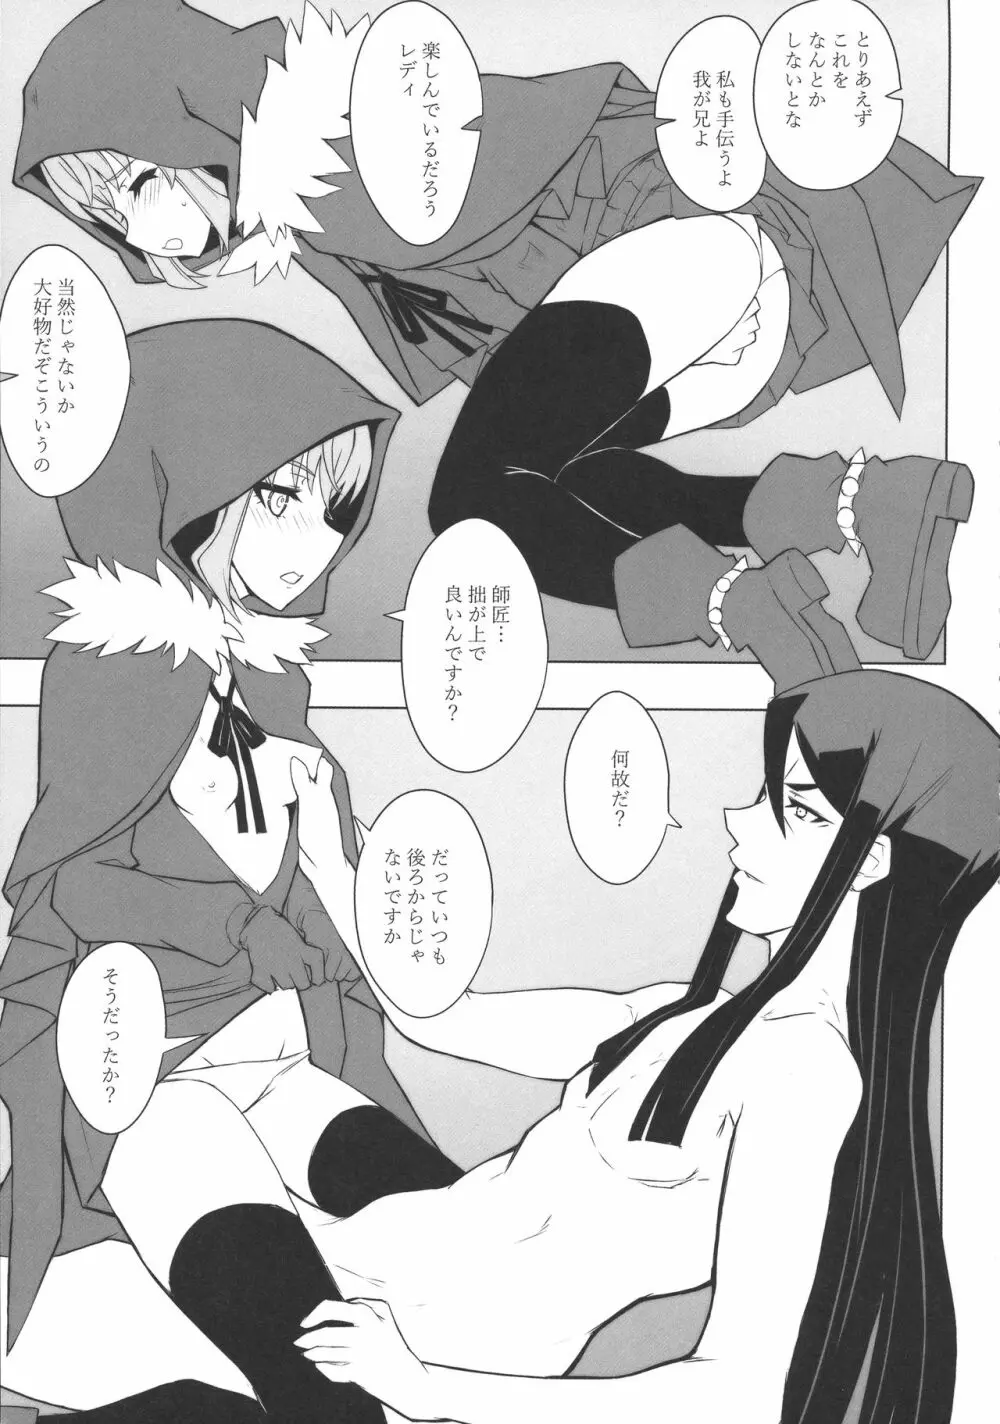 LADY REINES TIMES VOL.3 - page14